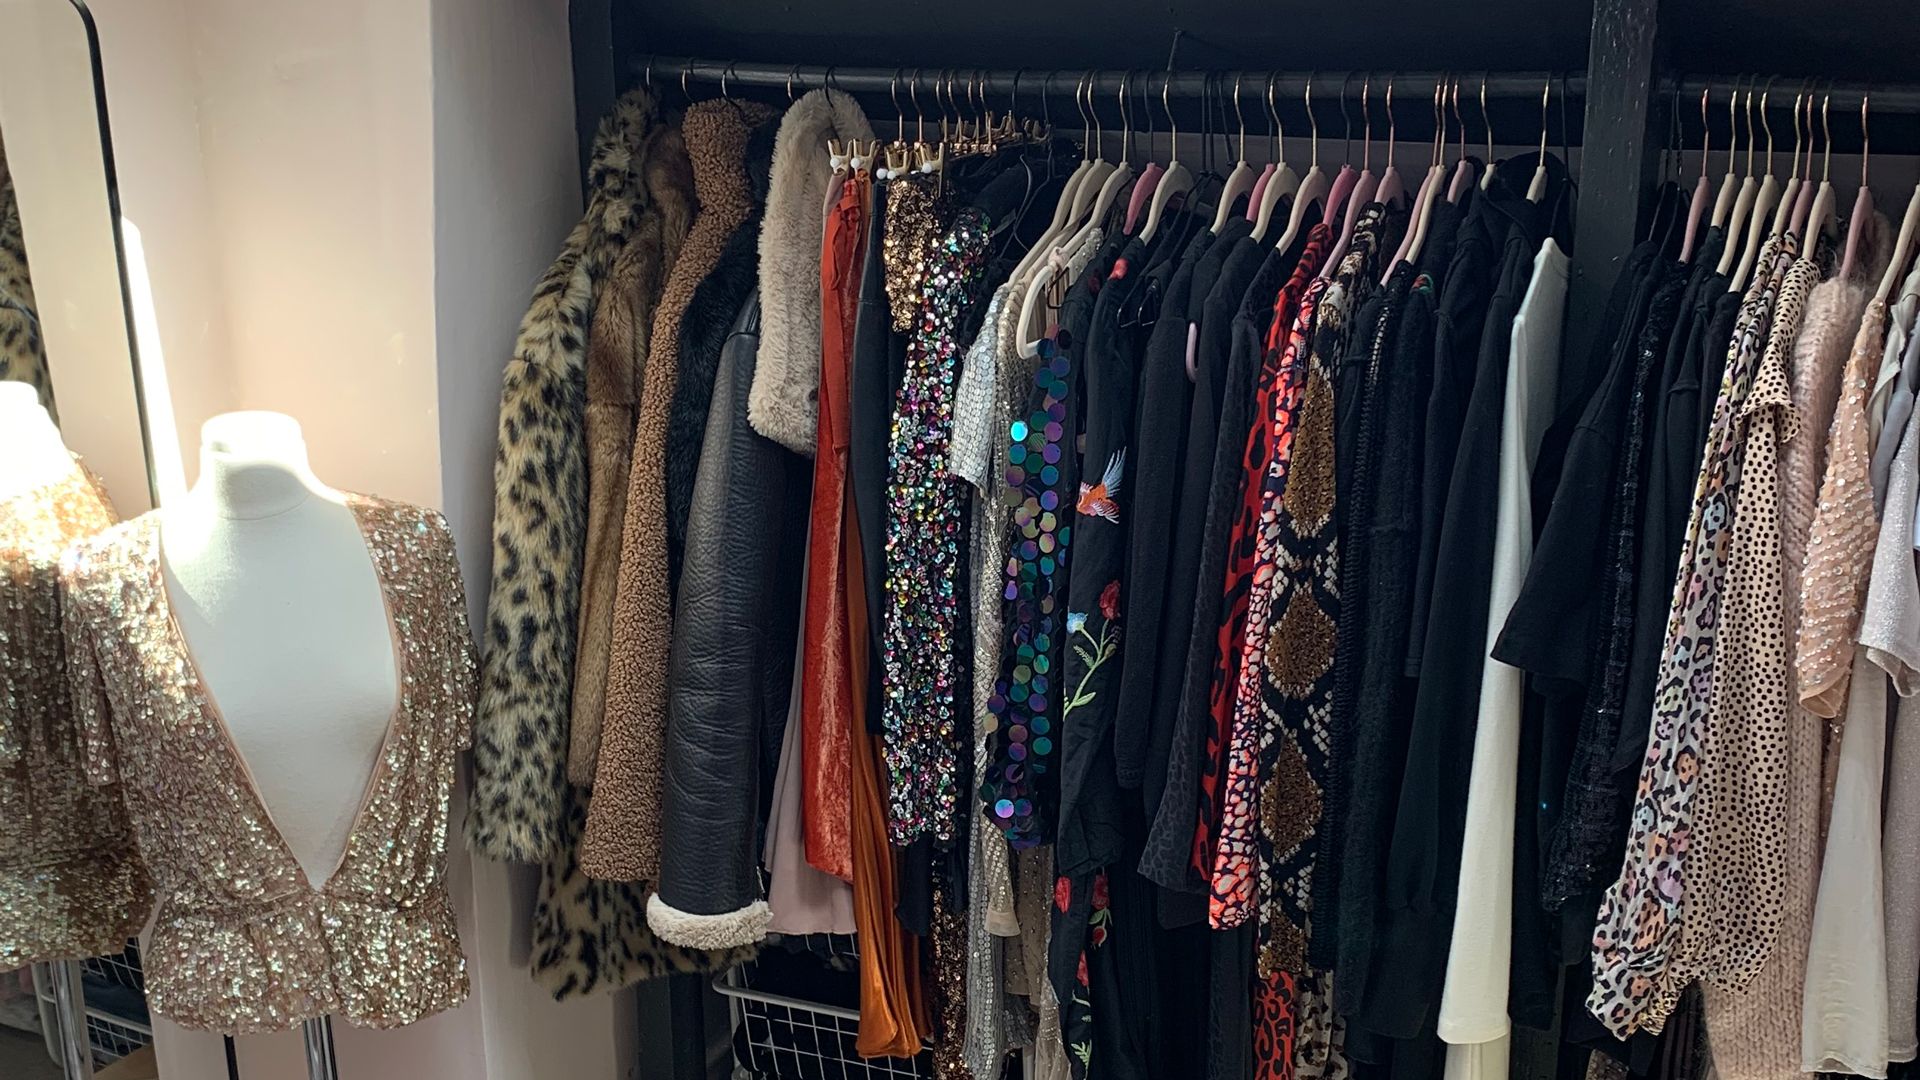 <p>                     "Upgrade your hangers," says Suzanne Spencer, Master KonMari Consultant, APDO member, and Founder of A Life More Organised. "Clear out empty hangers as they take up space – if you need to keep some use a box to store them tidily at the bottom of the wardrobe out of sight. Having a matching set of hangers really helps clothes to hang straight and save space (and stops the hangers from becoming tangled), switching to space-saving velvet hangers allows you to make the most of the space in your wardrobe."                   </p>                                      <p>                     "Skinny velvet hangers take up significantly less space than plastic or wooden hangers and are more visually appealing than wire ones," explains Kate. Adding matching mini hooks means you can store 2 or 3 items together in the most space-saving way possible! "                   </p>                                      <p>                     But it's imperative to research hangers to ensure they fit your clothes, warns Vicky, " because not all clothes are suitable for all hangers." Streamlining is one thing, but stretching your shoulders of your best garments is another.                     </p>